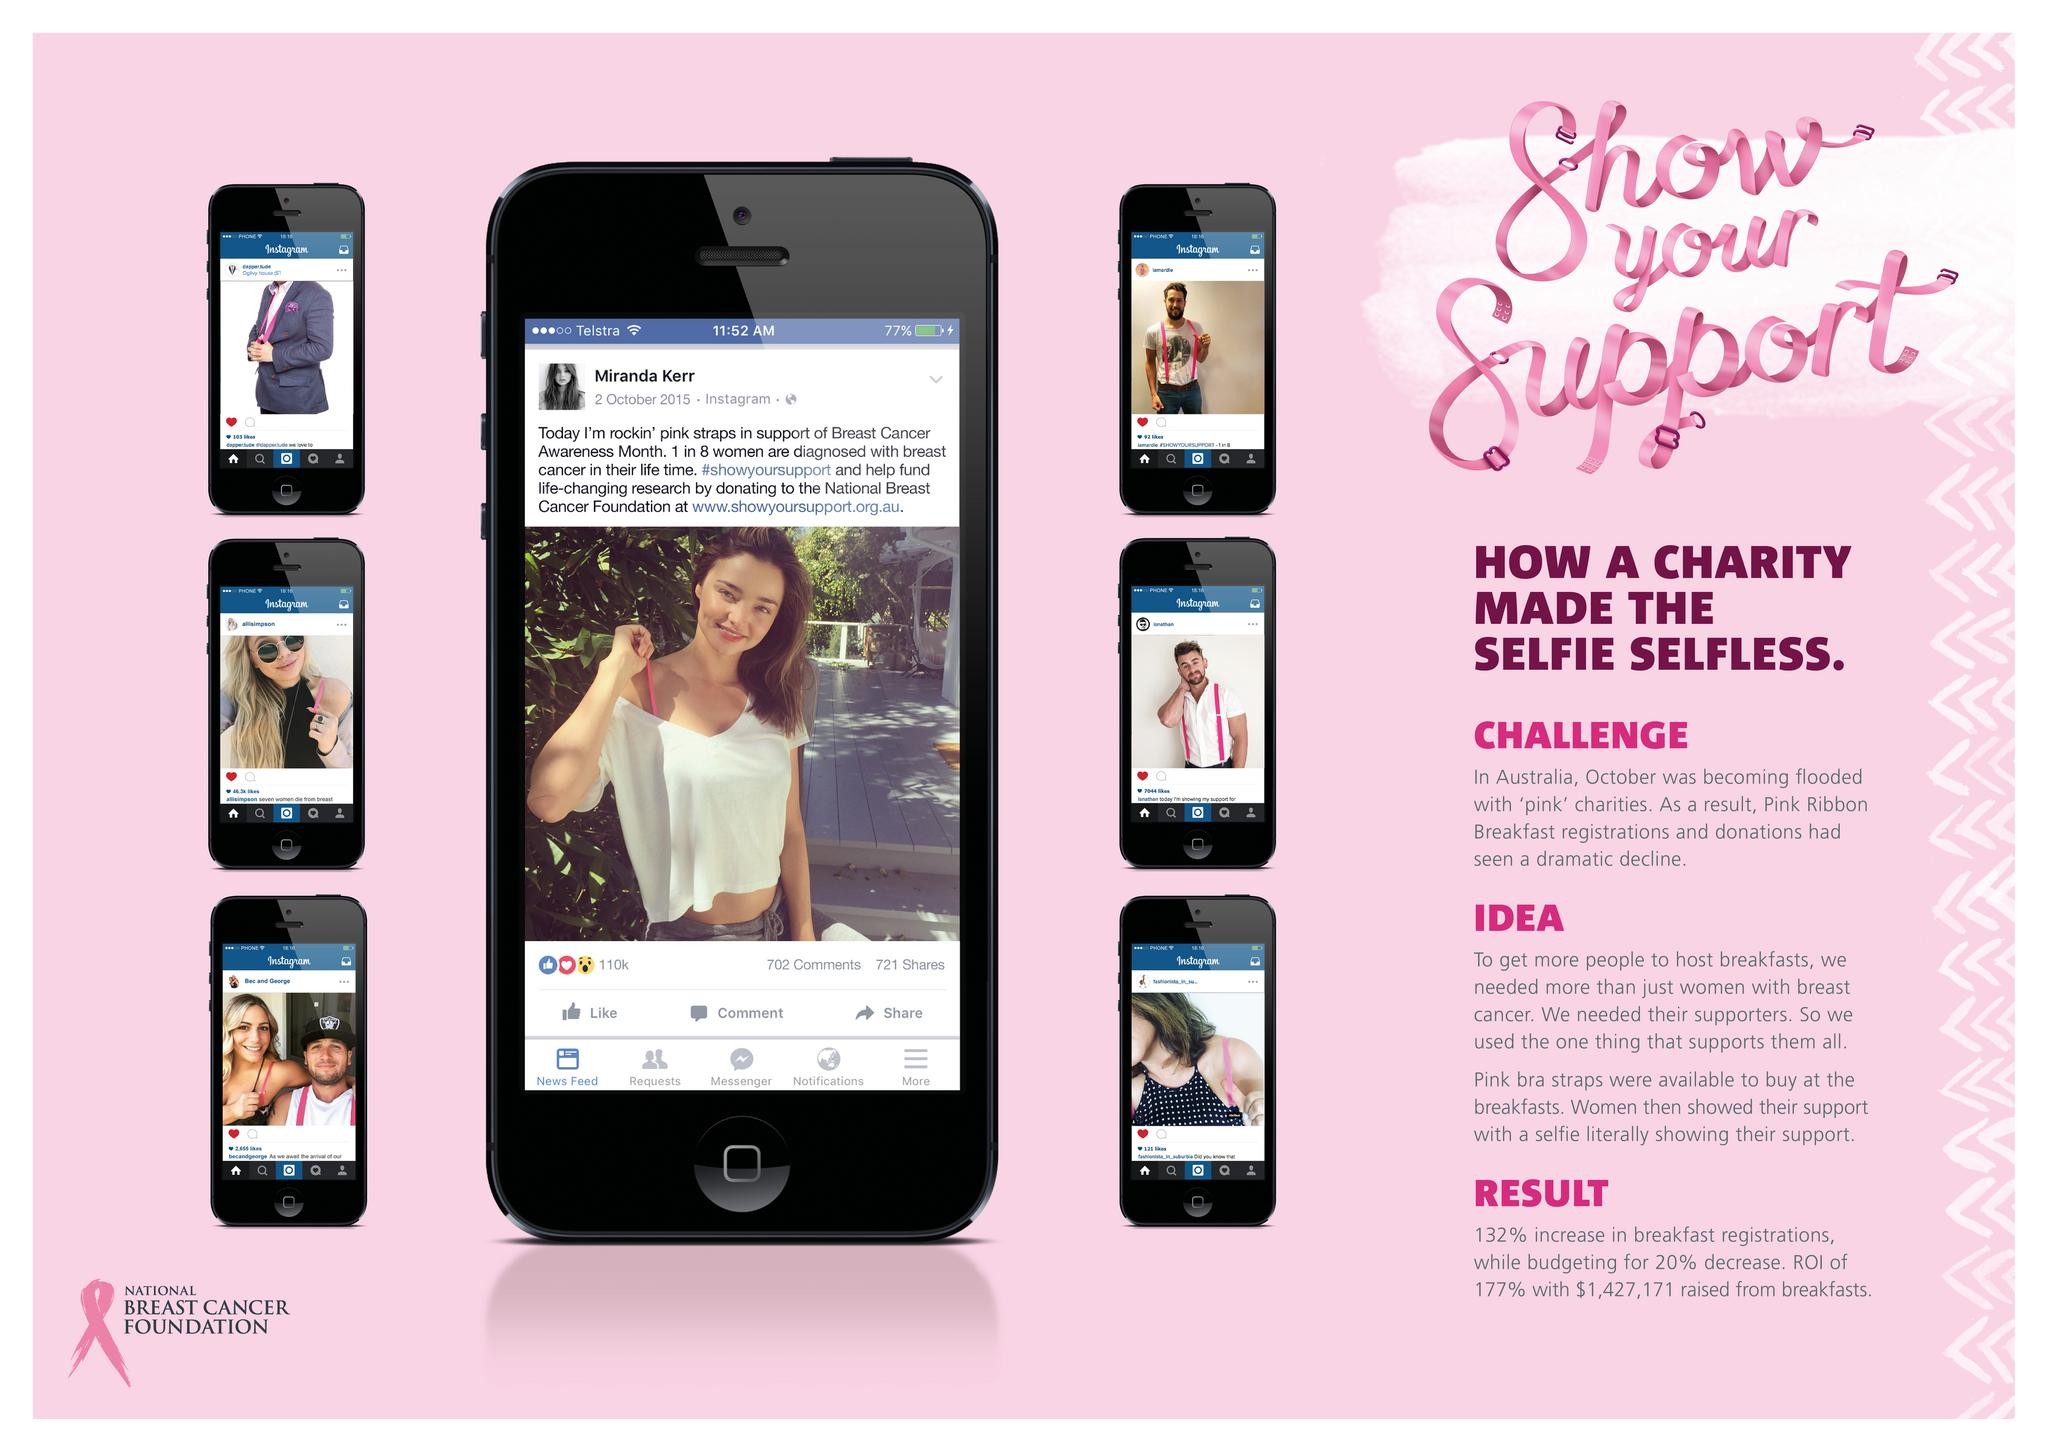 How NBCF turned a selfie into a selfless act